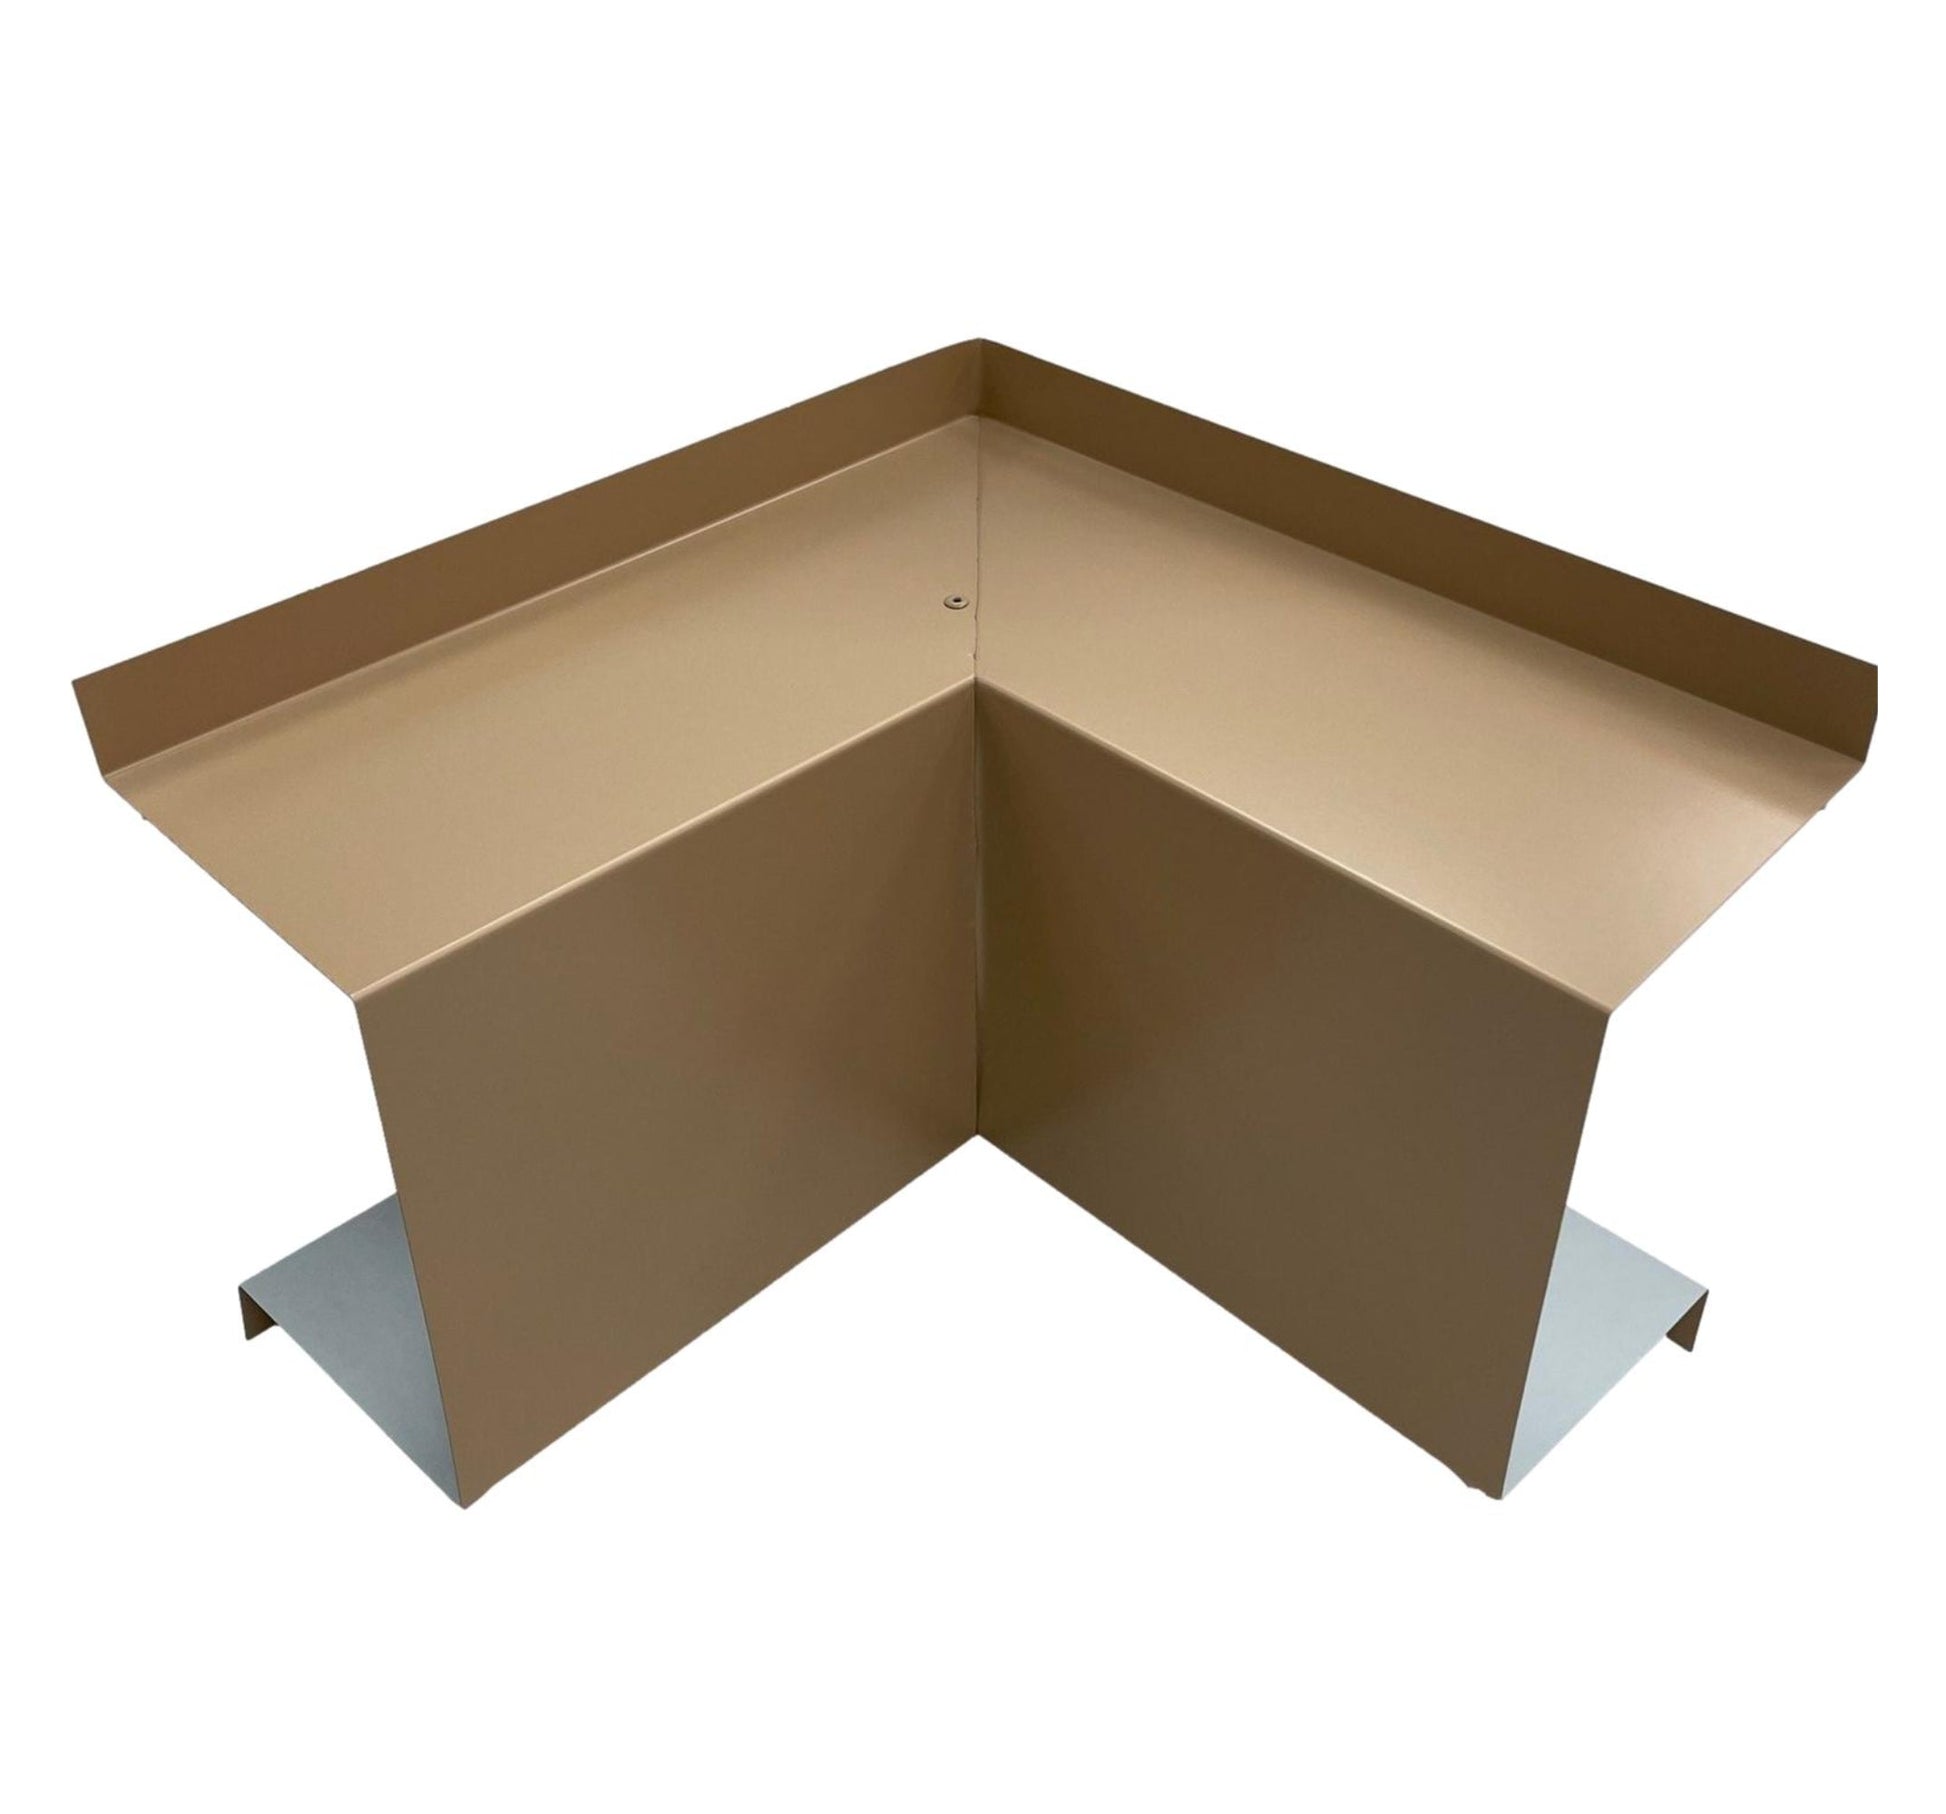 A Perma Cover Residential Series - Line Set Cover Inside Corner Elbows - Premium Quality in light brown, featuring a flat surface and sharp edges. The design has raised edges on one side and sturdy vertical supports underneath, resembling HVAC installations equipment or an inside corner elbow for a line set cover.